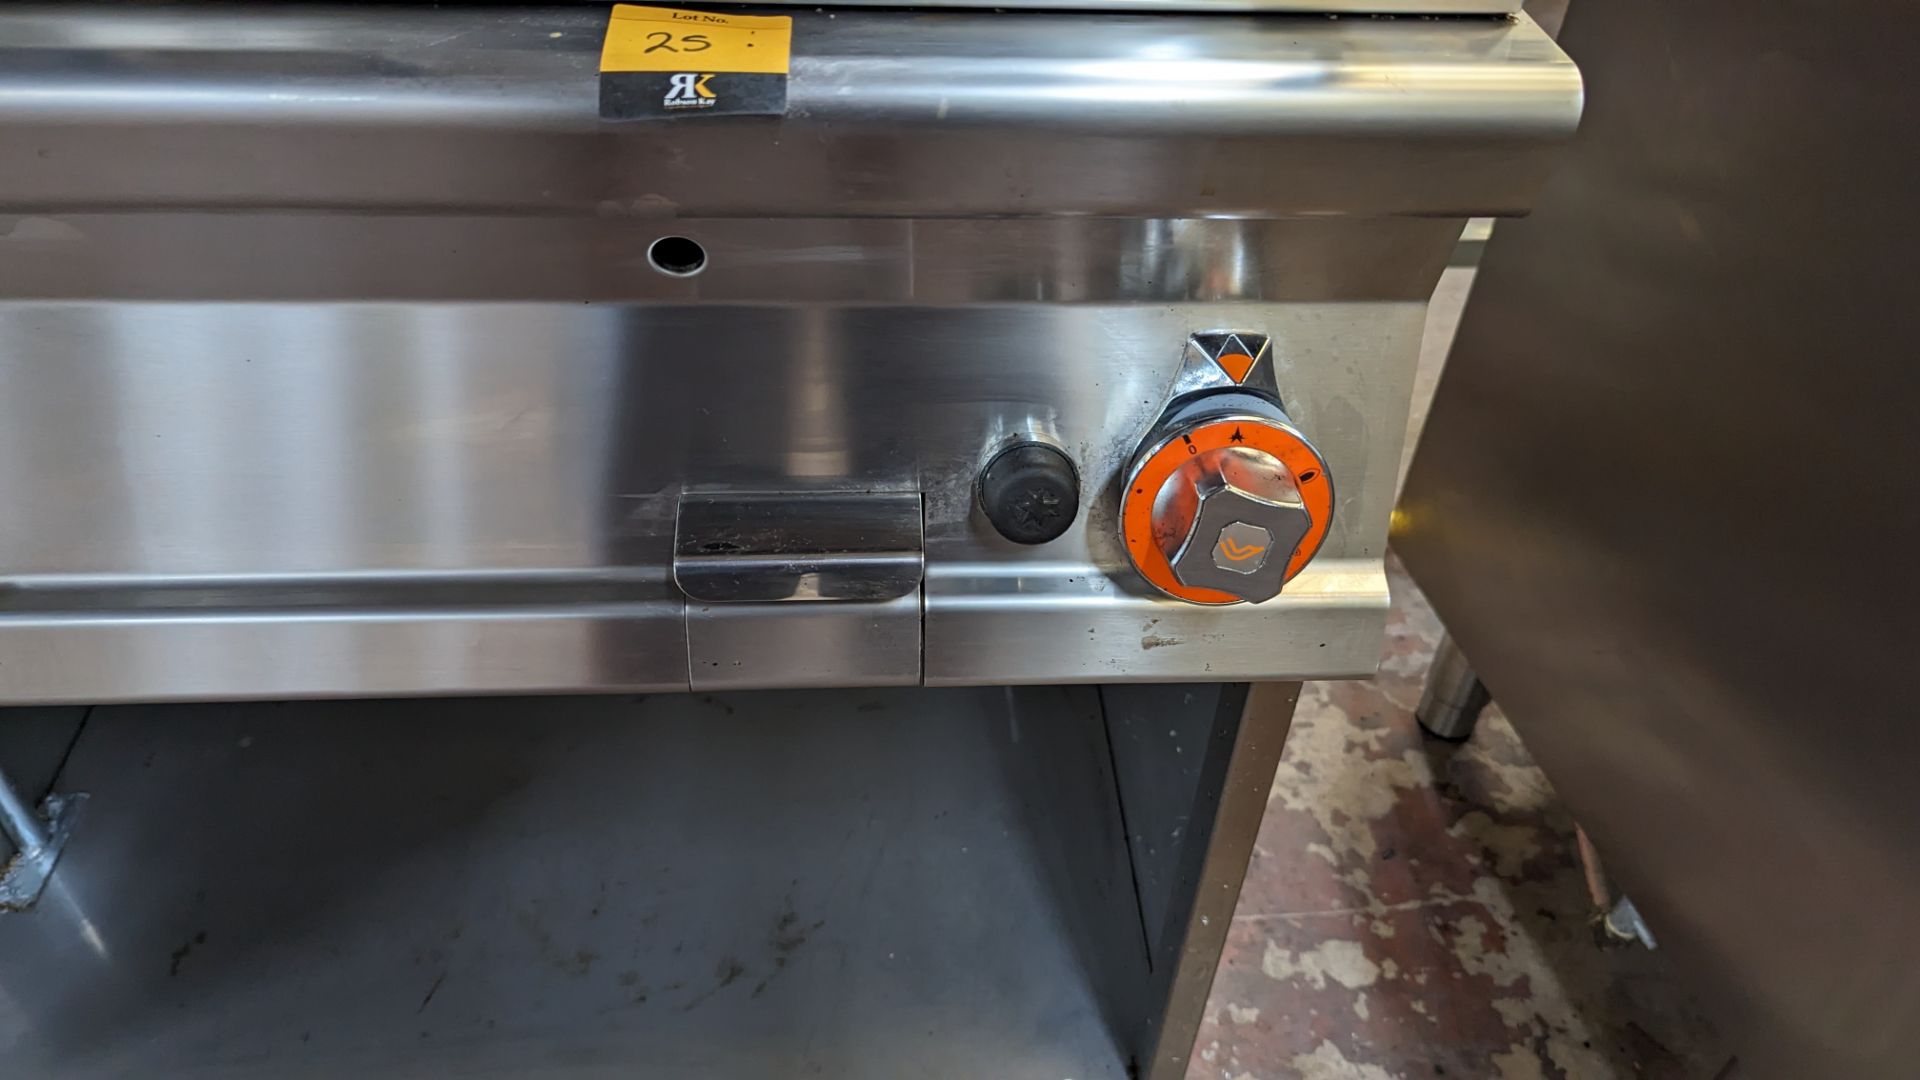 Lotus CW-78g stainless steel twin width chargrill unit on open cabinet, measuring 800mm wide x 700mm - Image 9 of 17